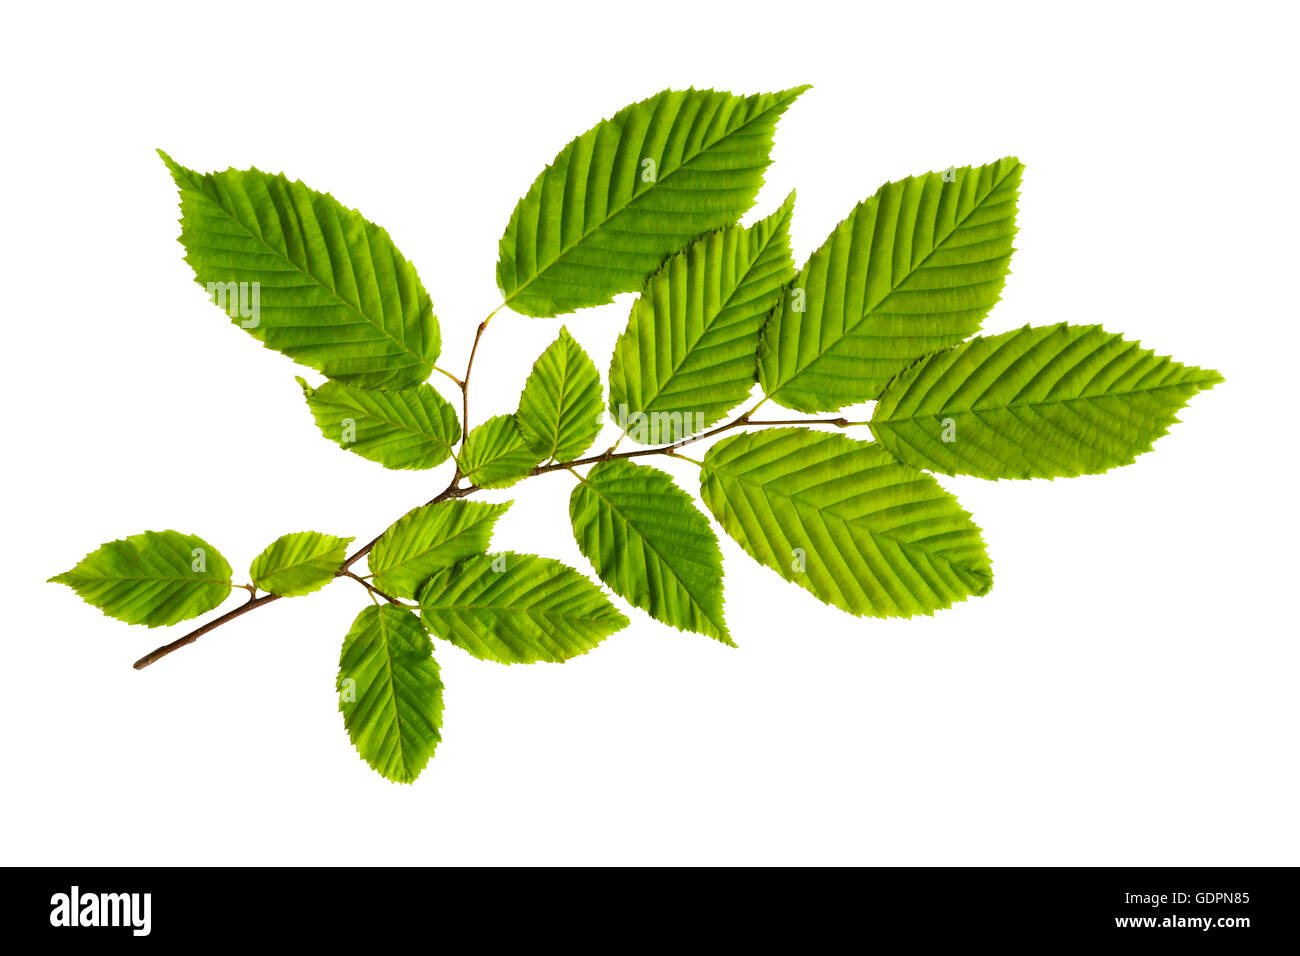 American hornbeam leaves on branch cut out. Stock Photo